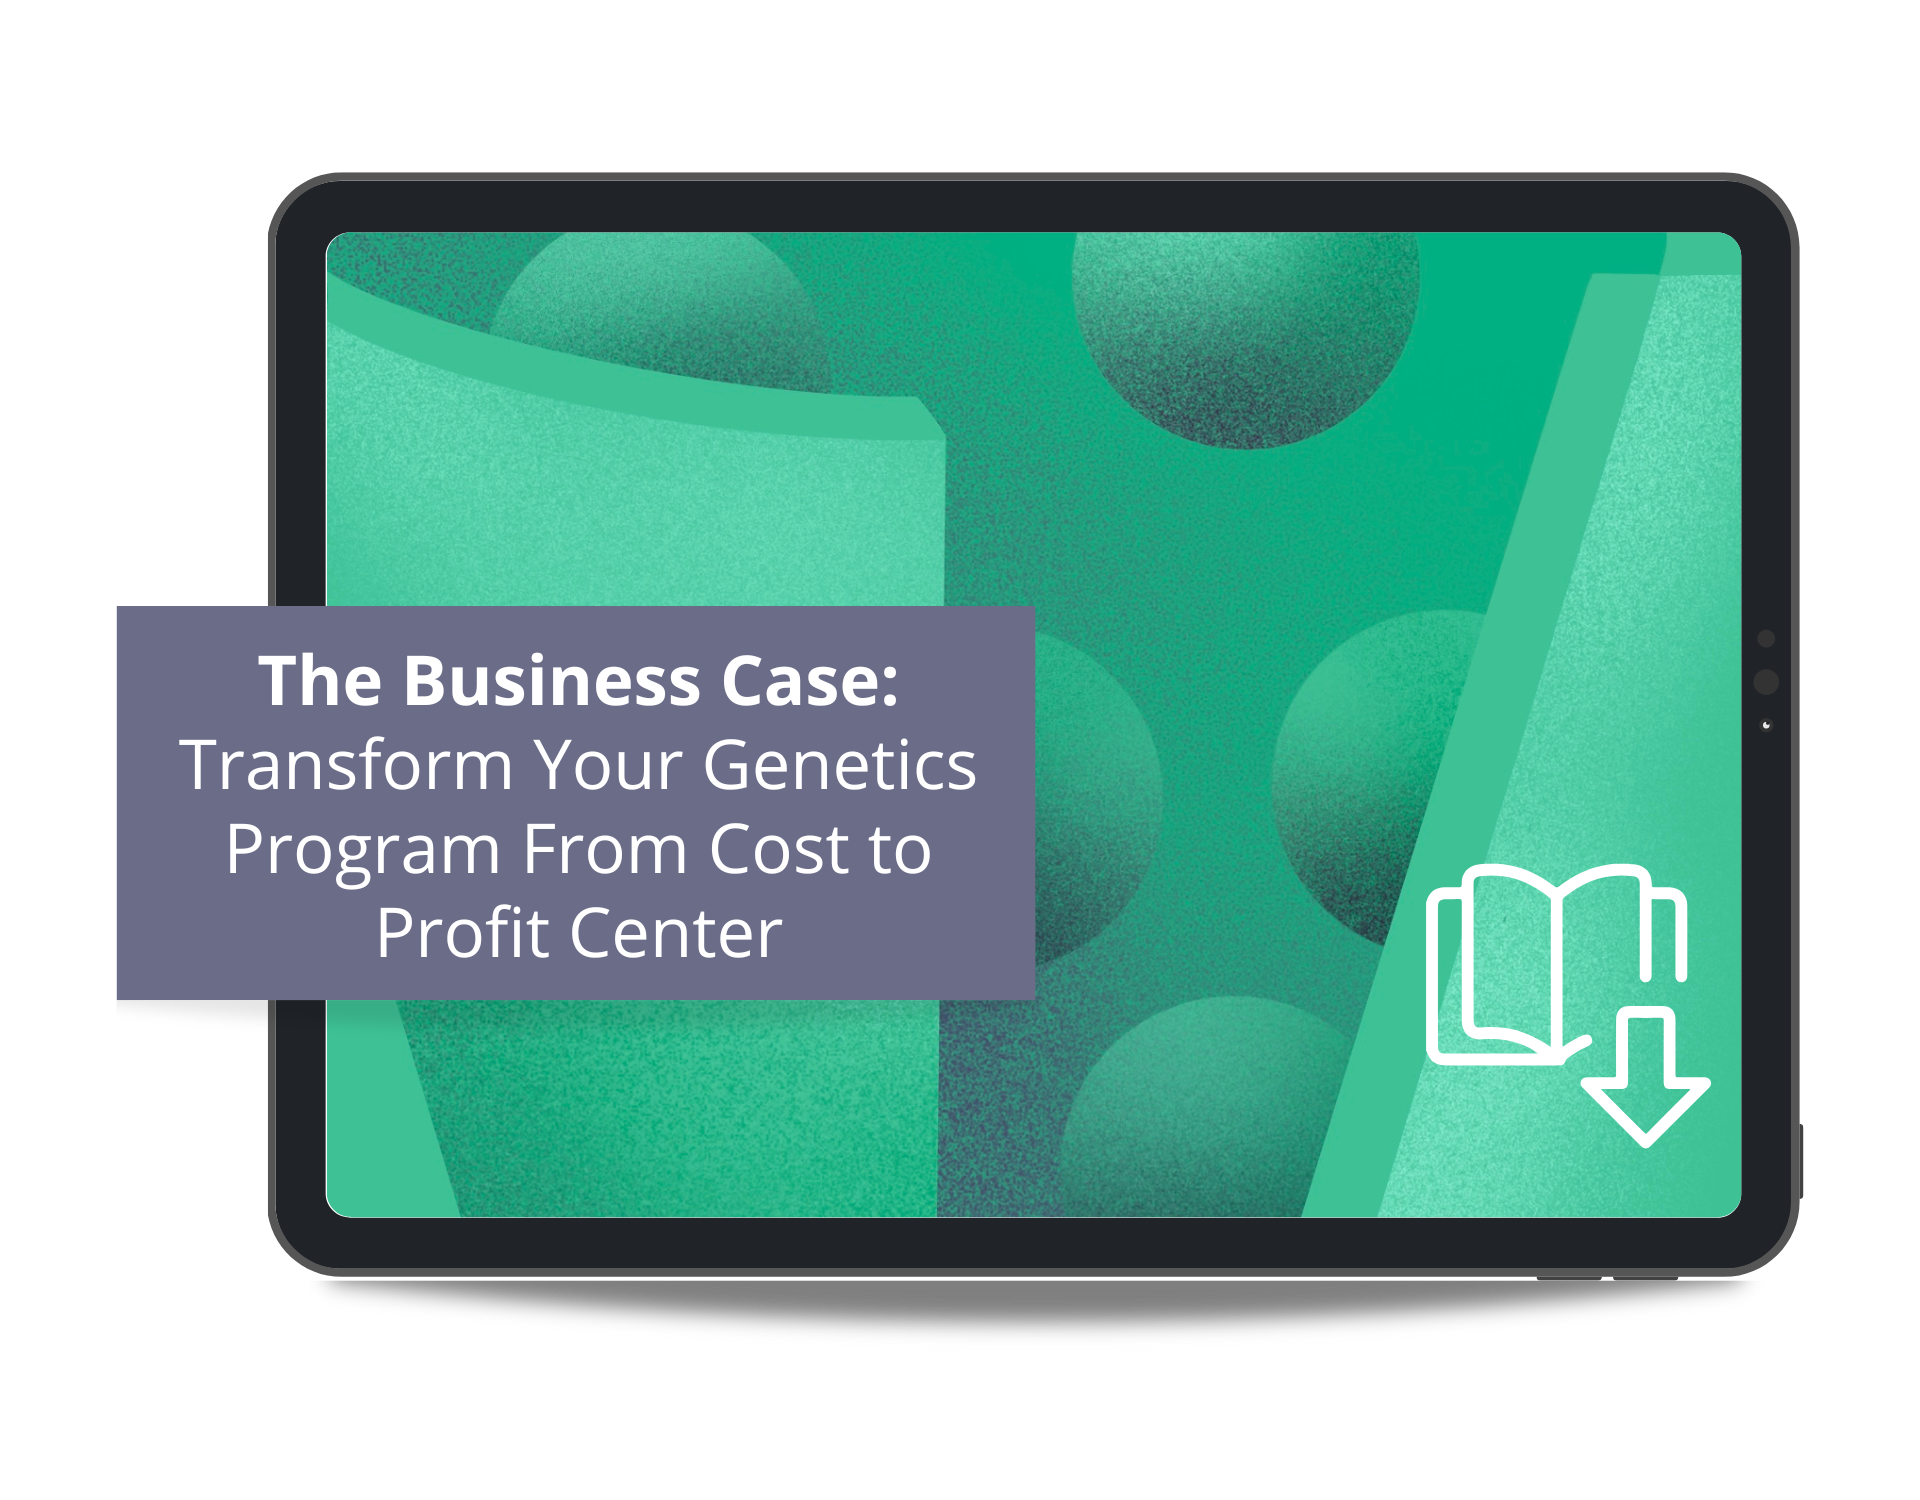 eBook Mockup: The Business Case